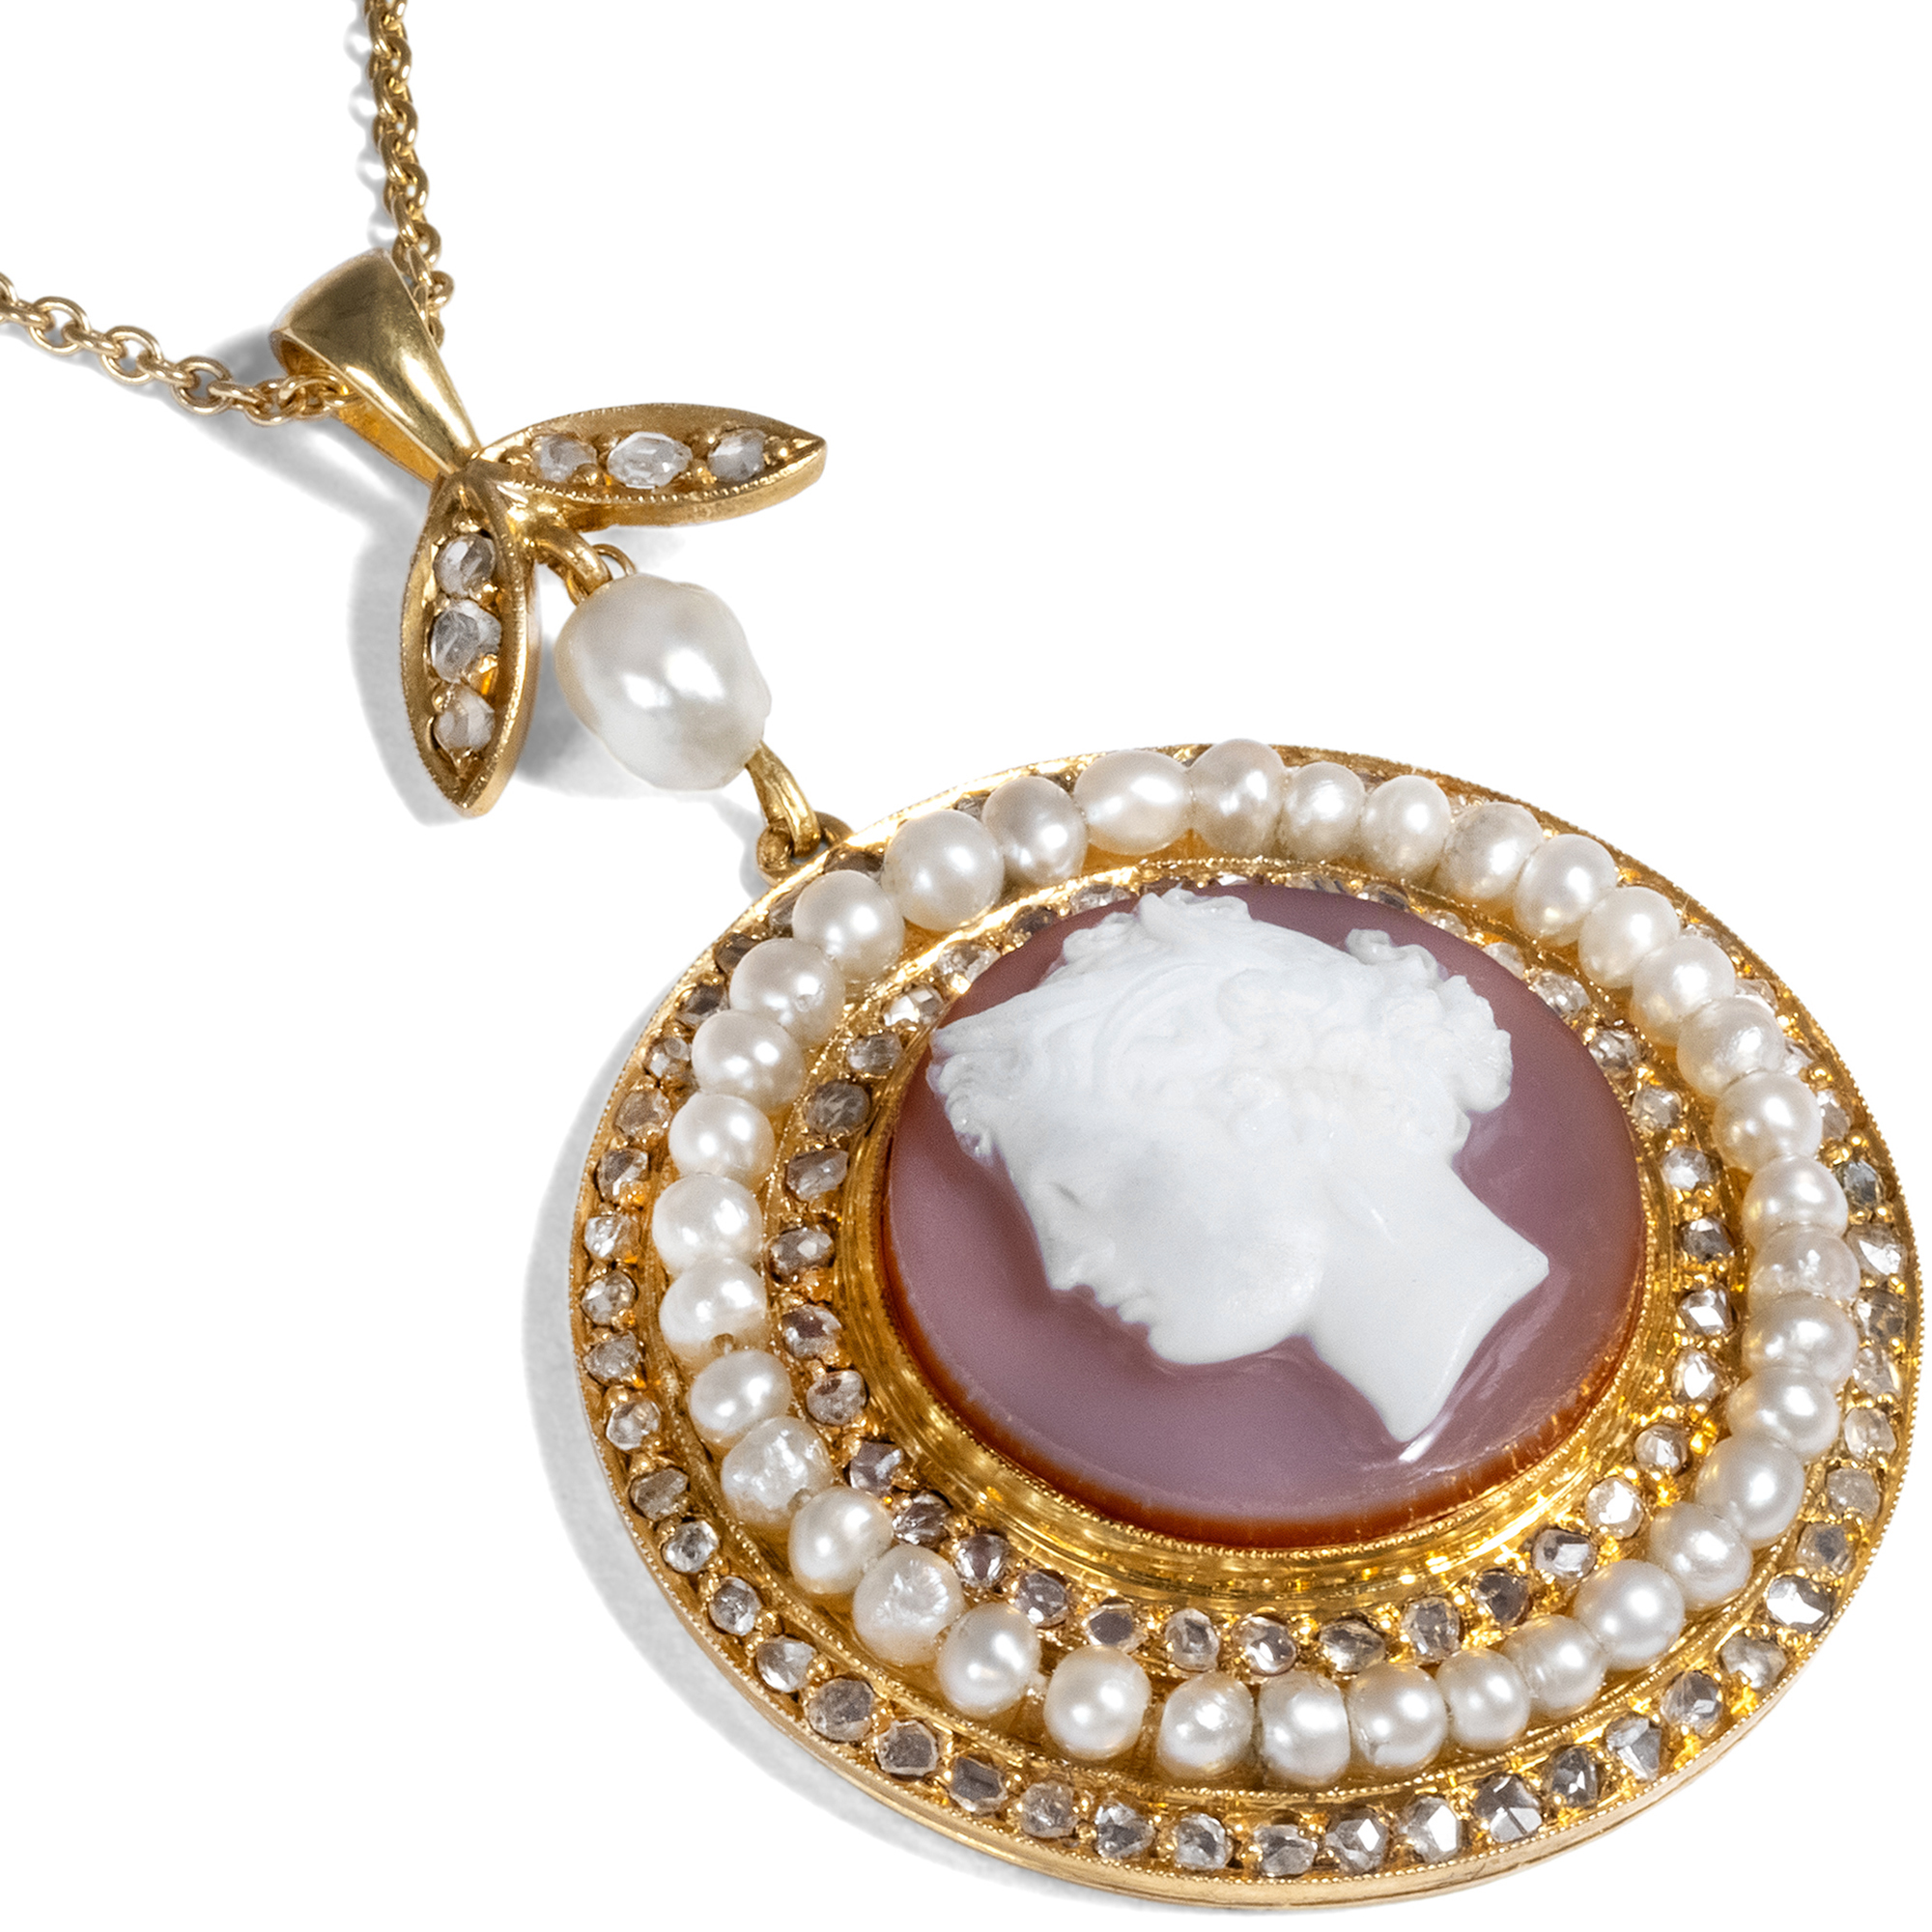 Antique Agate Cameo Pendant of Syrinx with Diamonds & Pearls in Gold, ca. 1870 & 1980